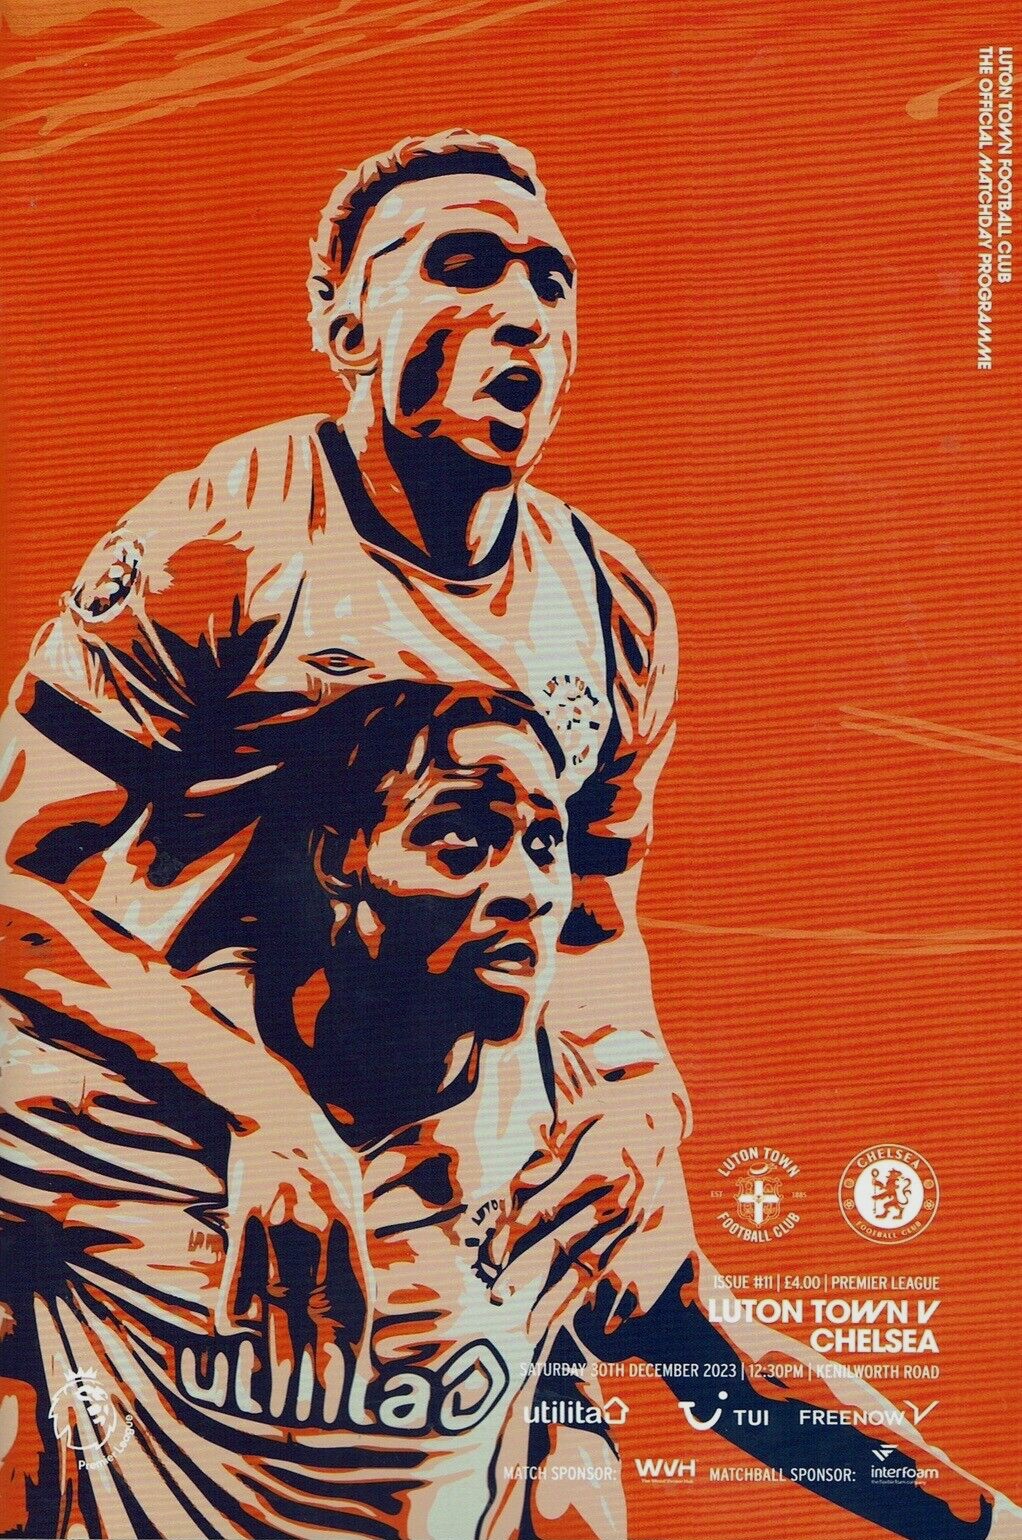 programme cover for Luton Town v Chelsea, Saturday, 30th Dec 2023